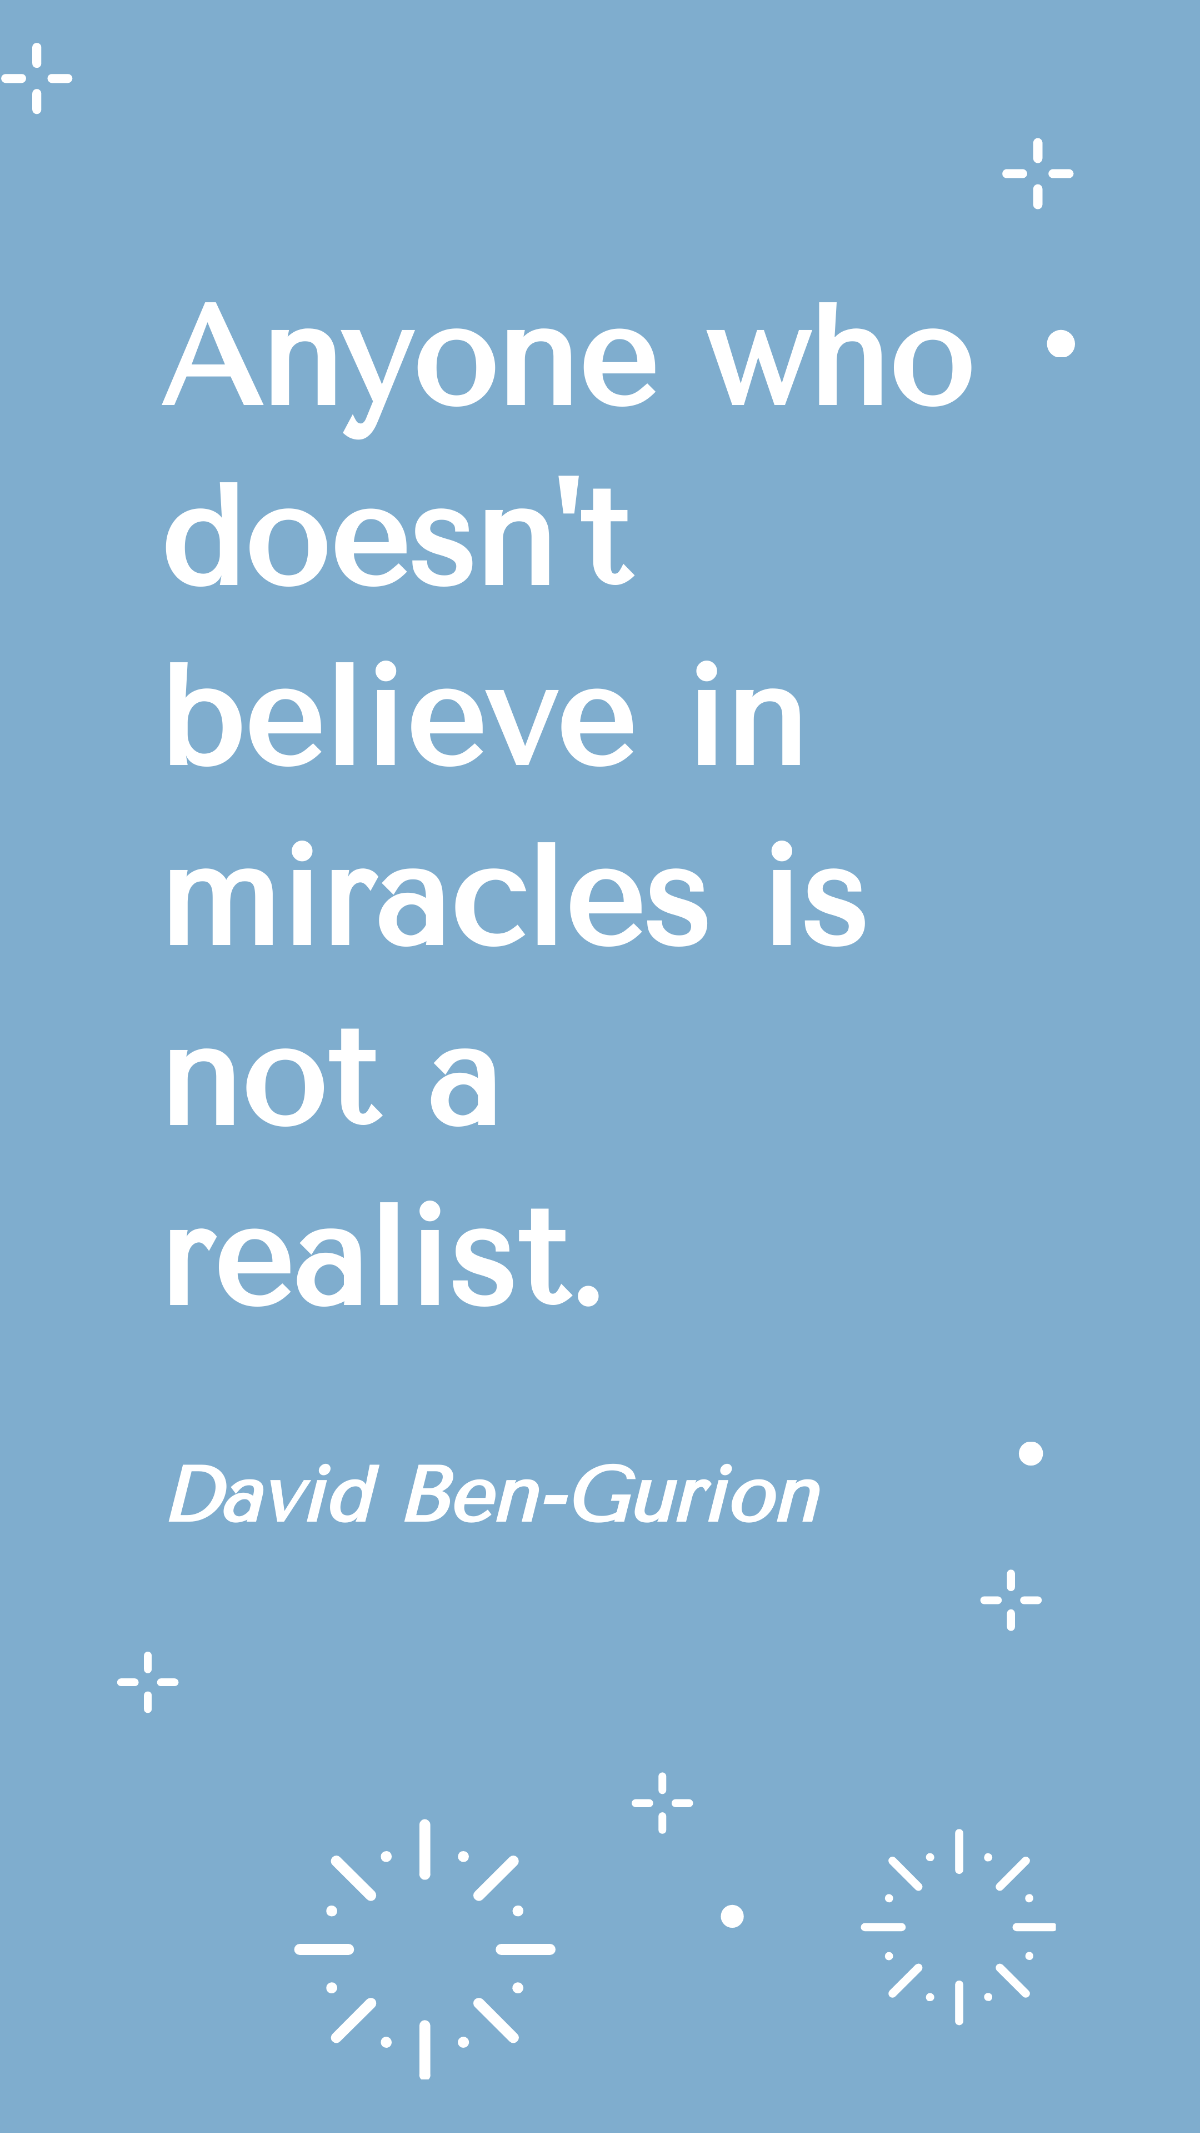 David Ben-Gurion - Anyone who doesn't believe in miracles is not a realist. Template